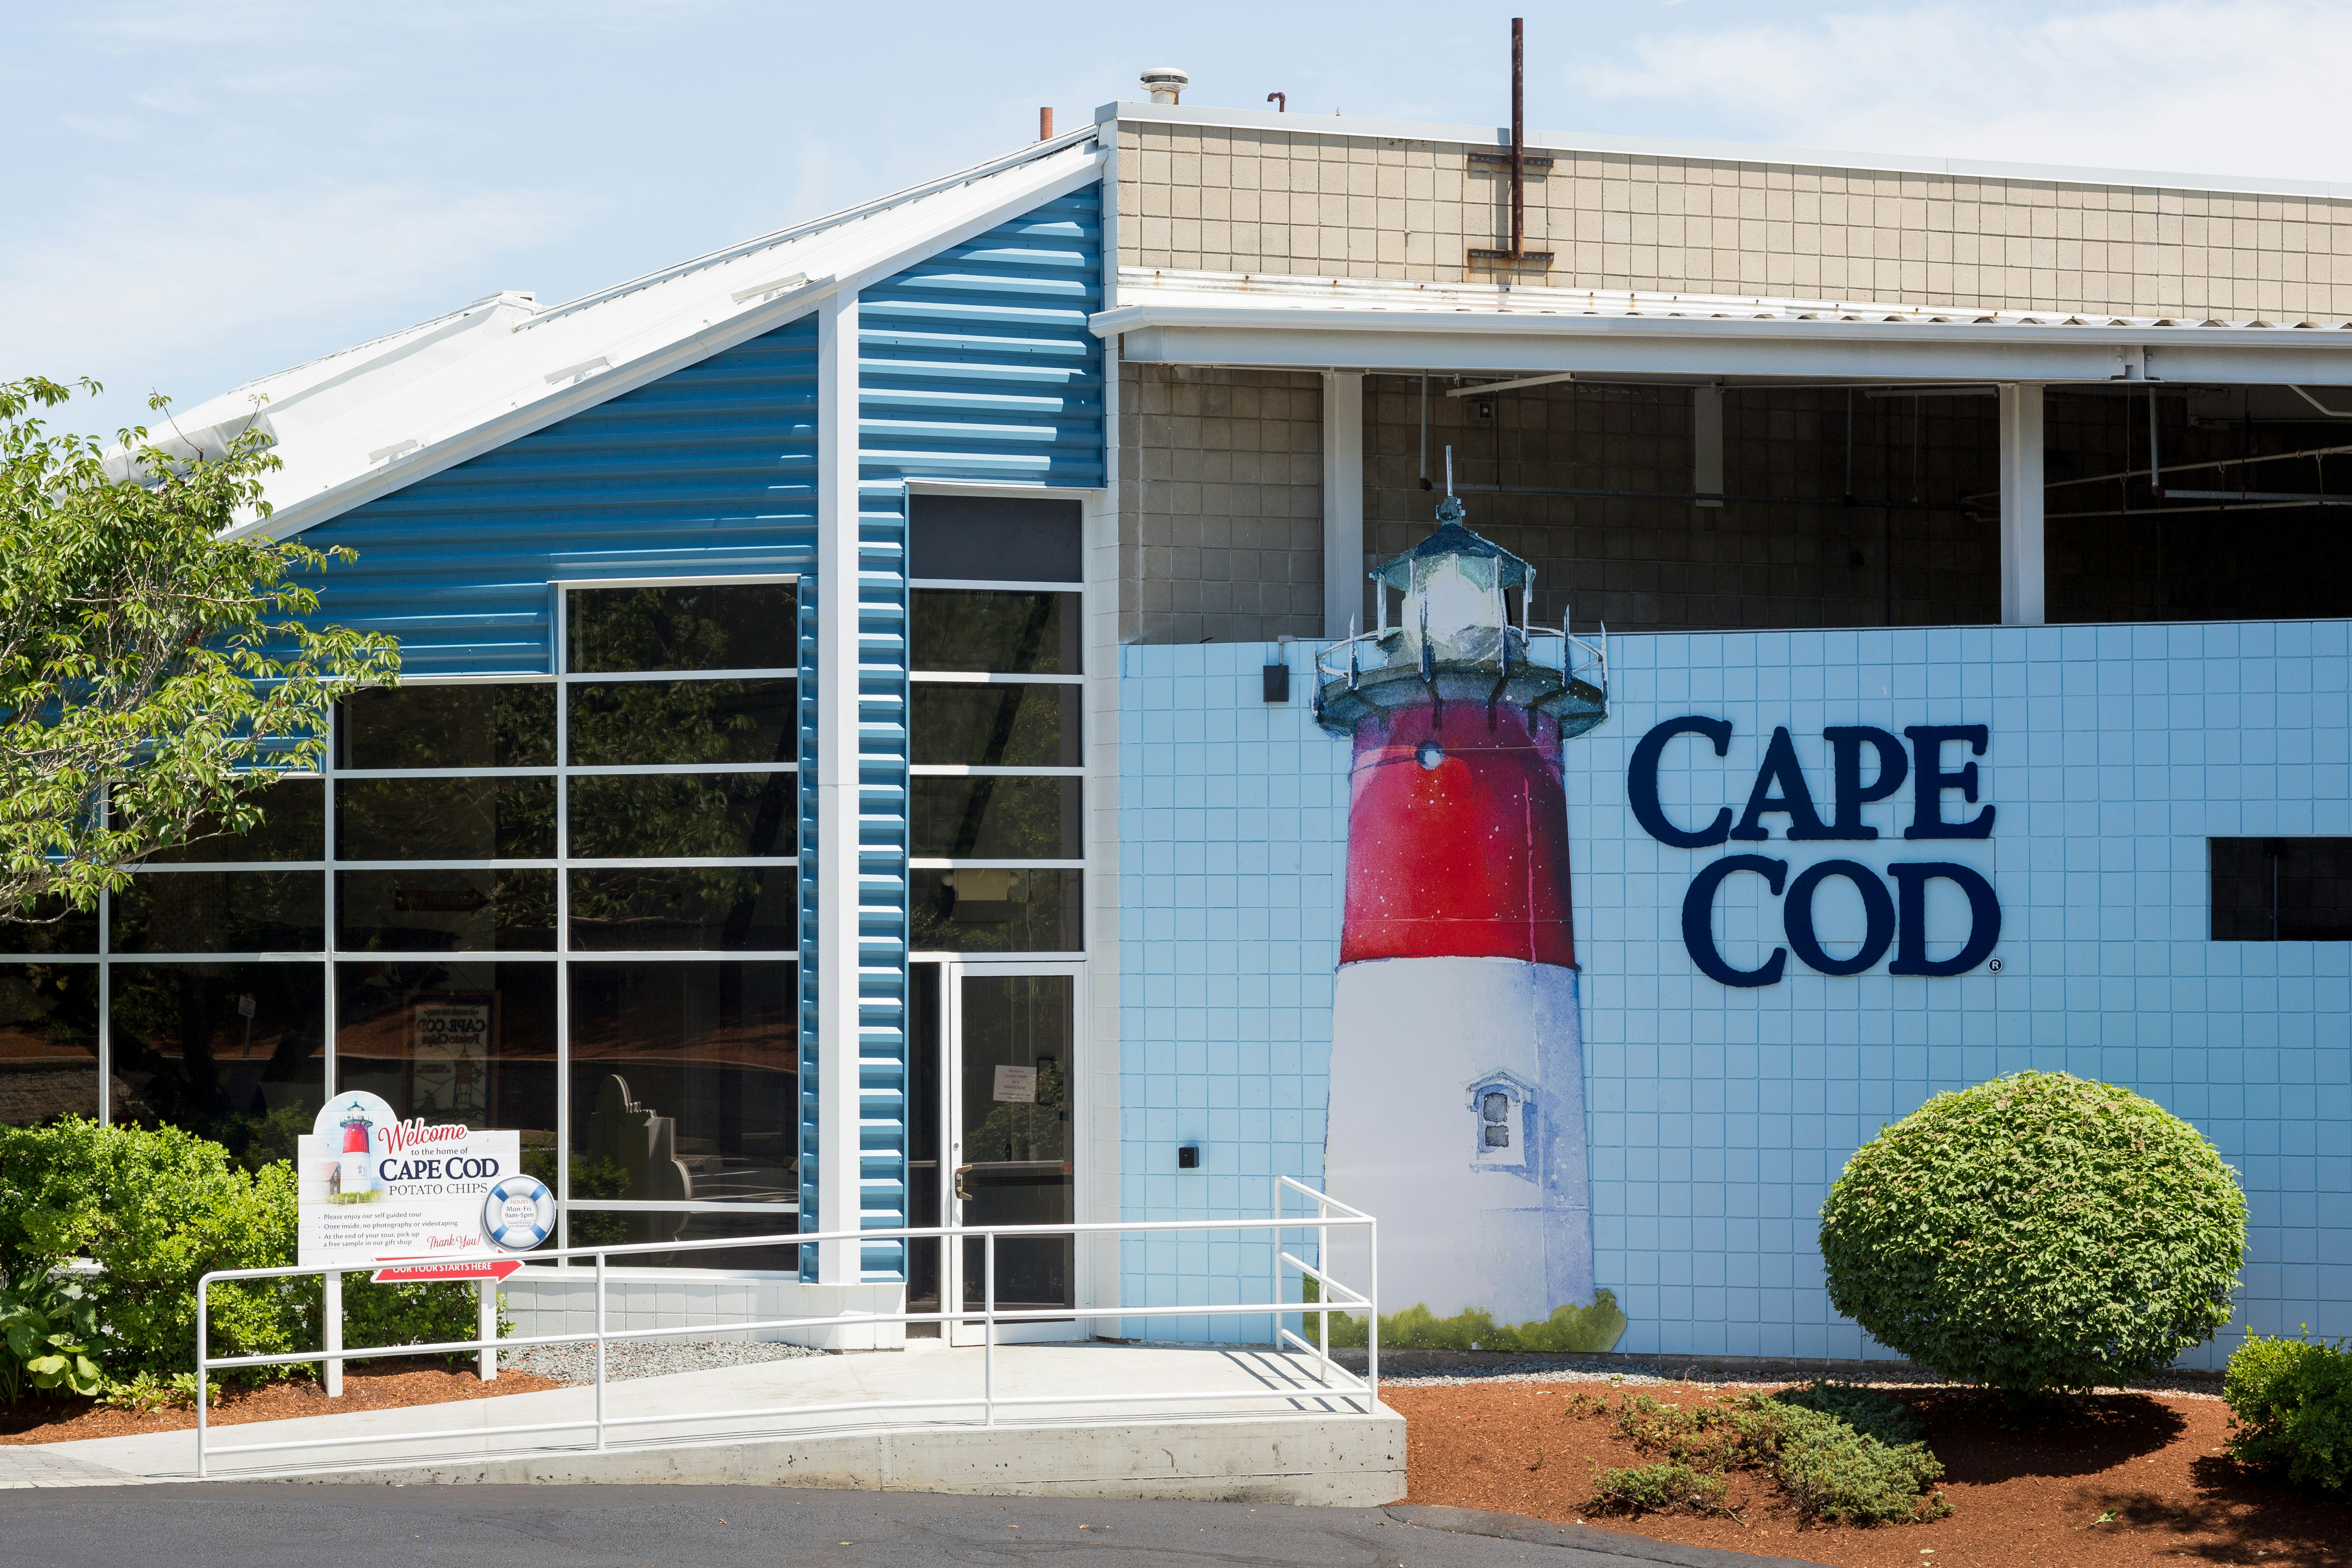 The front facade of the Cape Cod Potato Chip factory